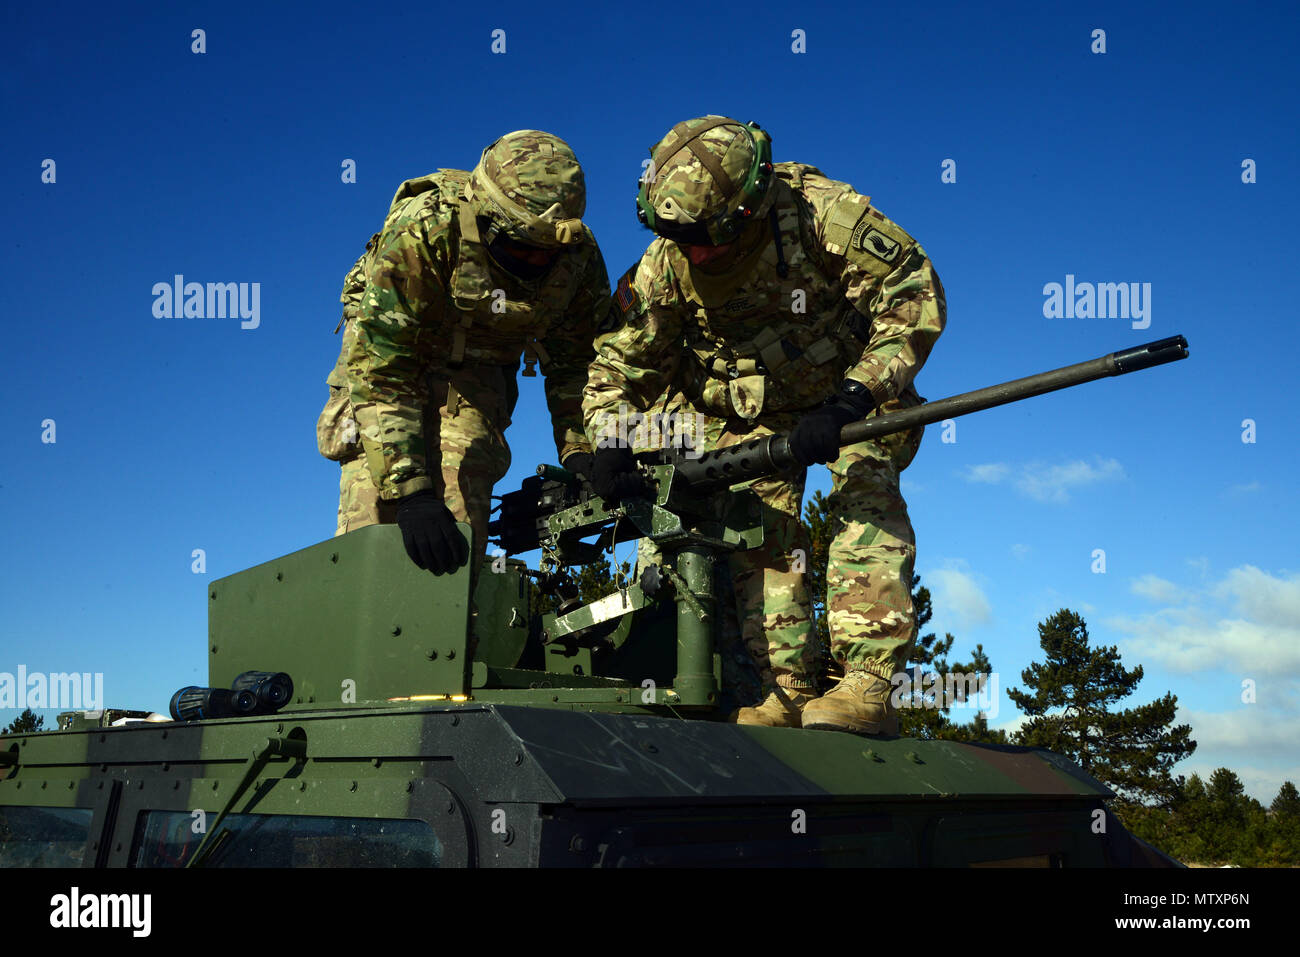 U.S. Army paratroopers from the 173rd Brigade Support Battalion, 173rd Airborne Brigade prepare to qualify .50-caliber machine gun during Exercise Lipizzaner III in Bac, Slovenia, on Jan. 25, 2017. Lipizzaner is a combined squad-level training exercise in preparation for platoon evaluation, and to validate battalion-level deployment procedures. (U.S. Army photo by Visual Information Specialist Massimo Bovo/Released) Stock Photo